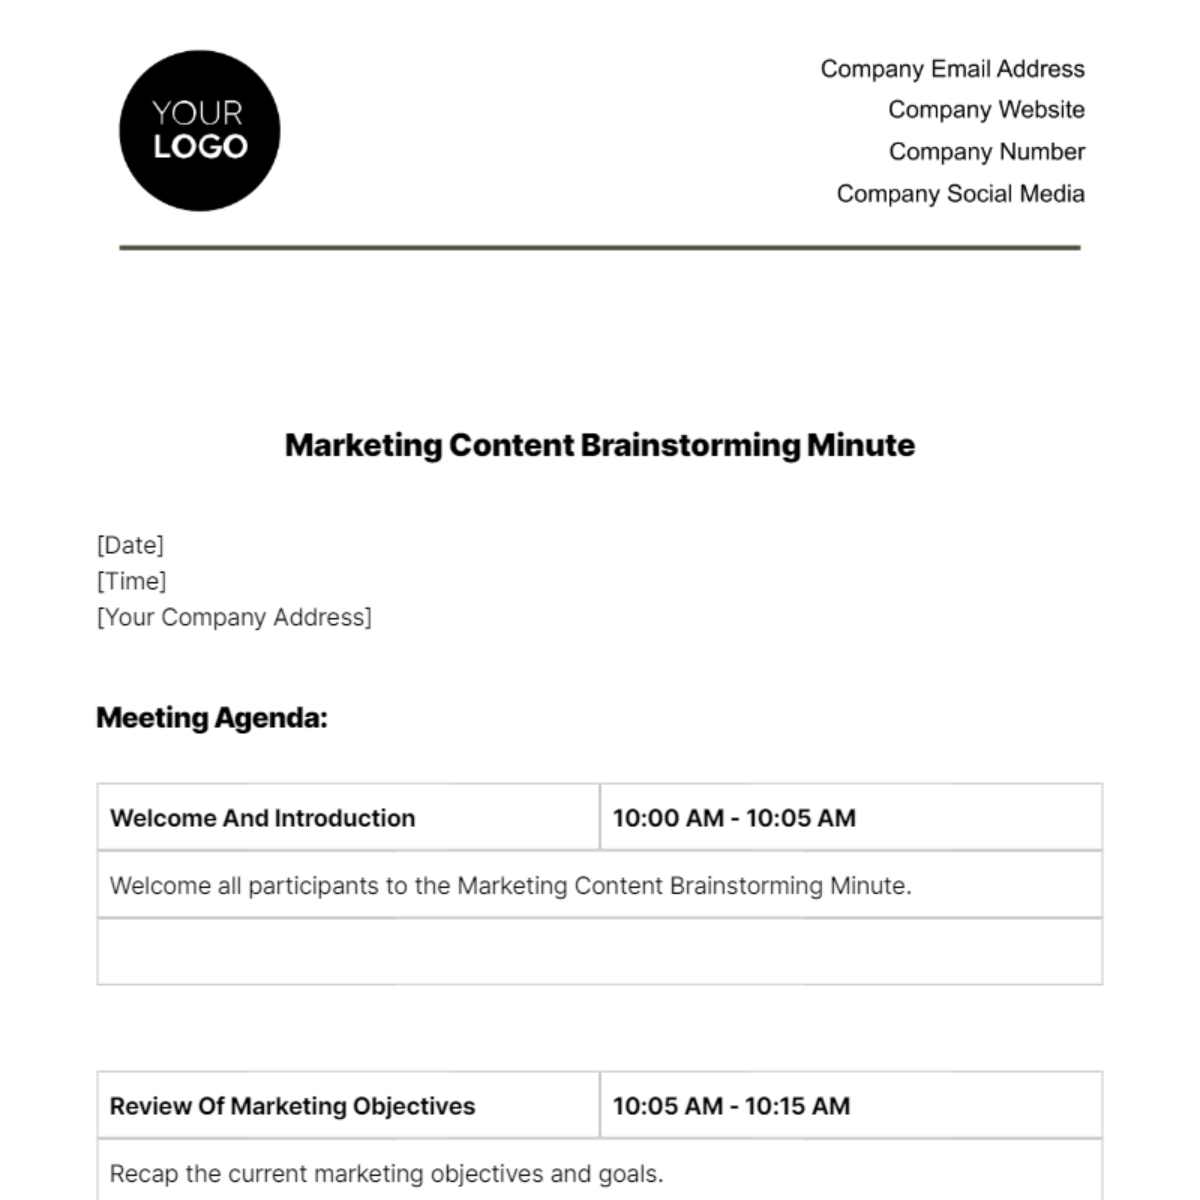 Marketing Content Brainstorming Minute Template